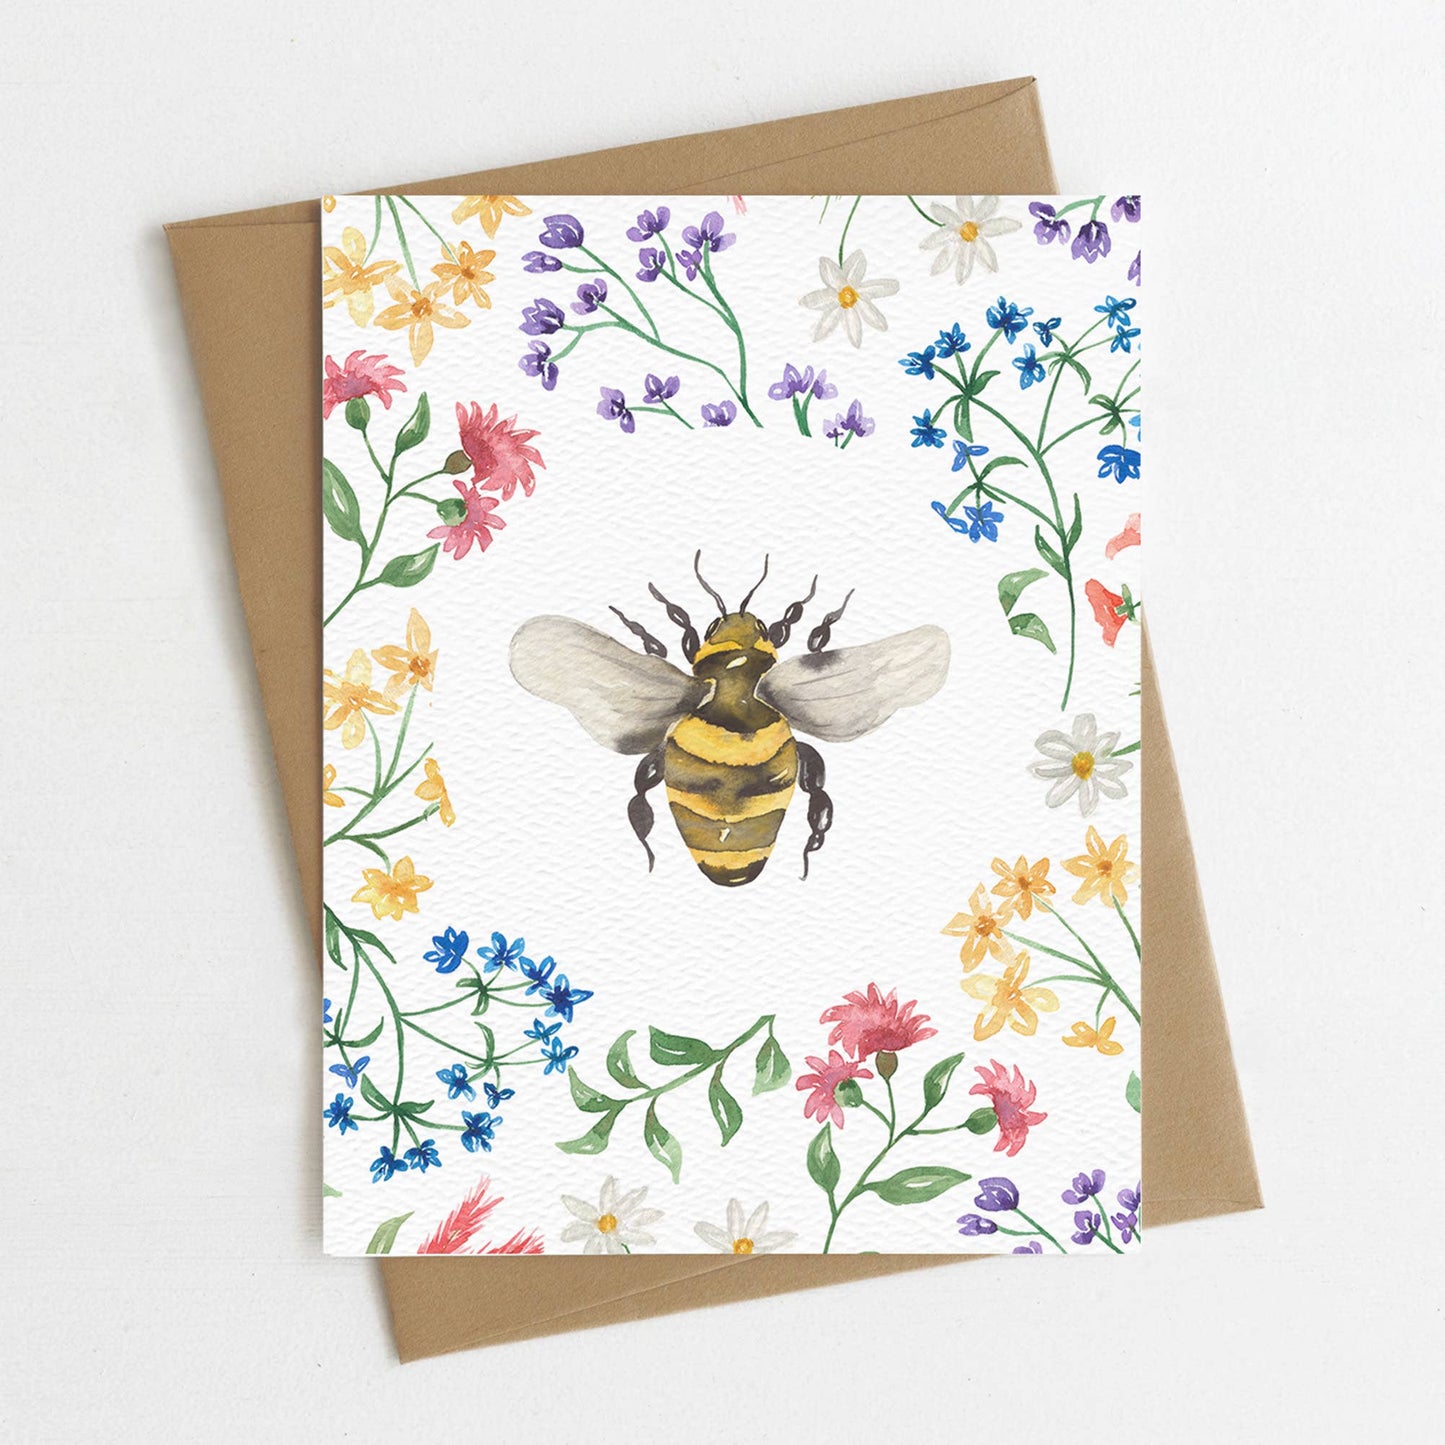 Blue Thistle - Bumble Bee Cards, Botanical Nature Card, Wildflowers